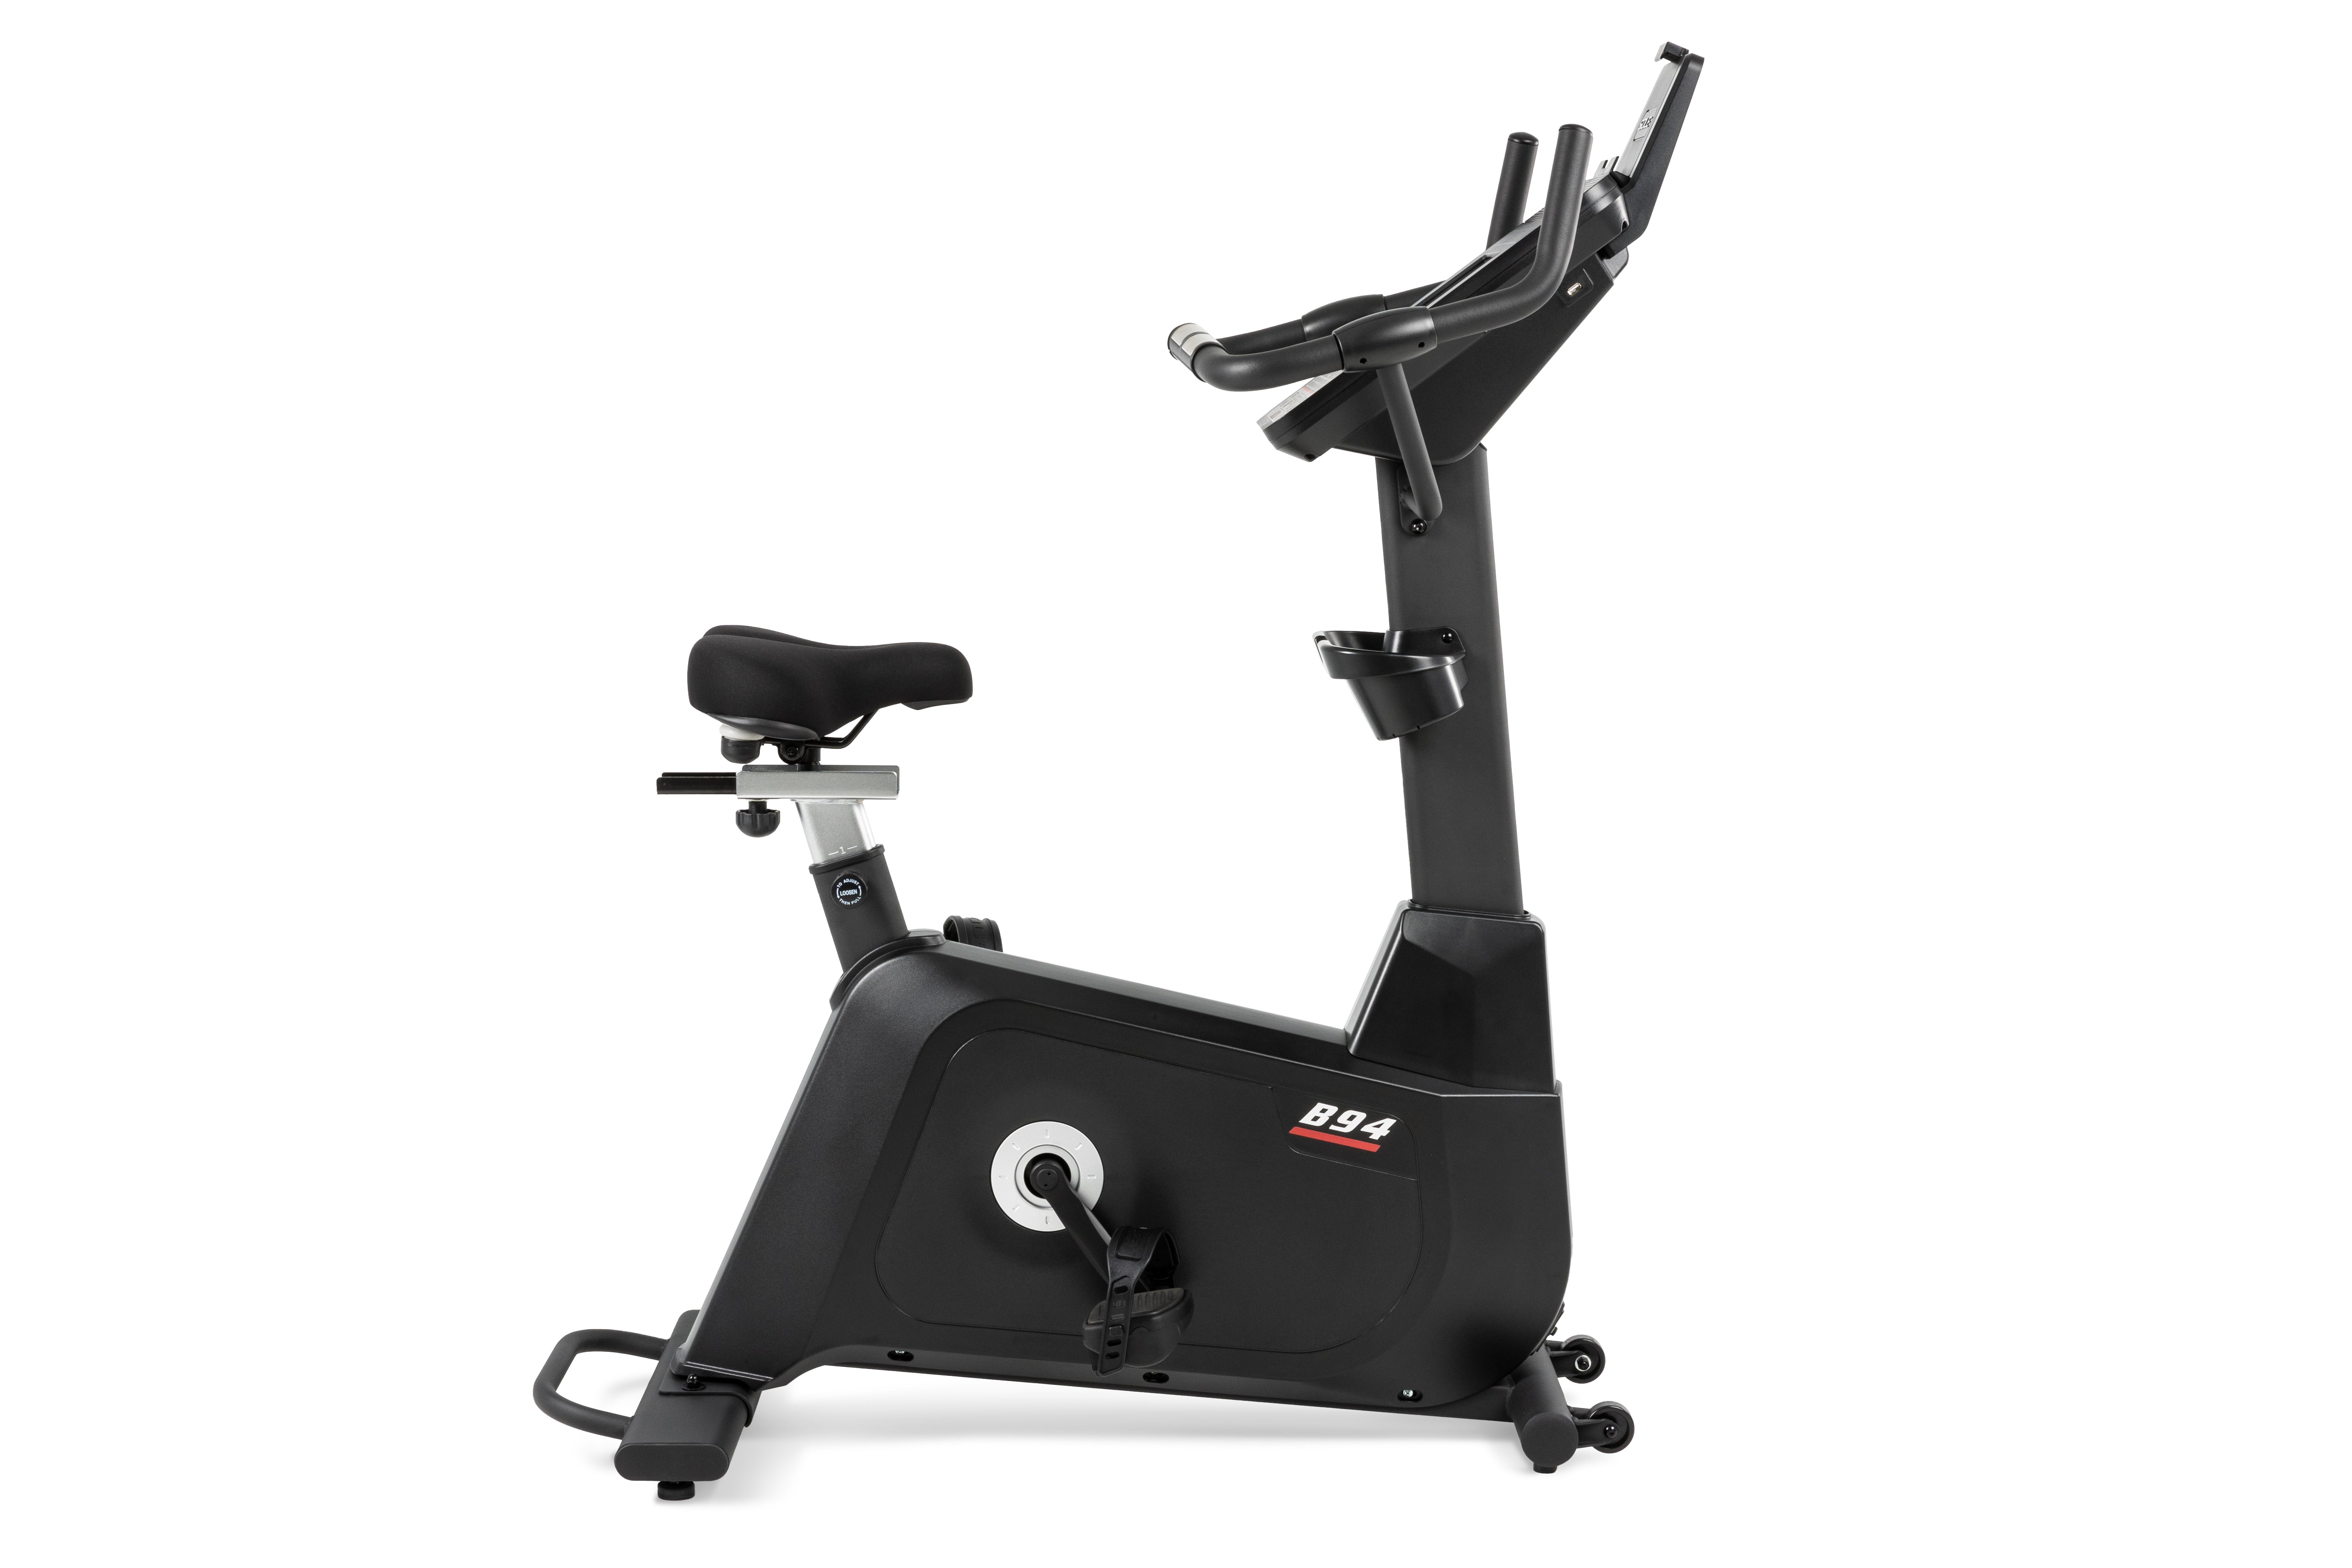 Sole B94 upright exercise bike viewed from the side, highlighting its adjustable seat and sleek black design.